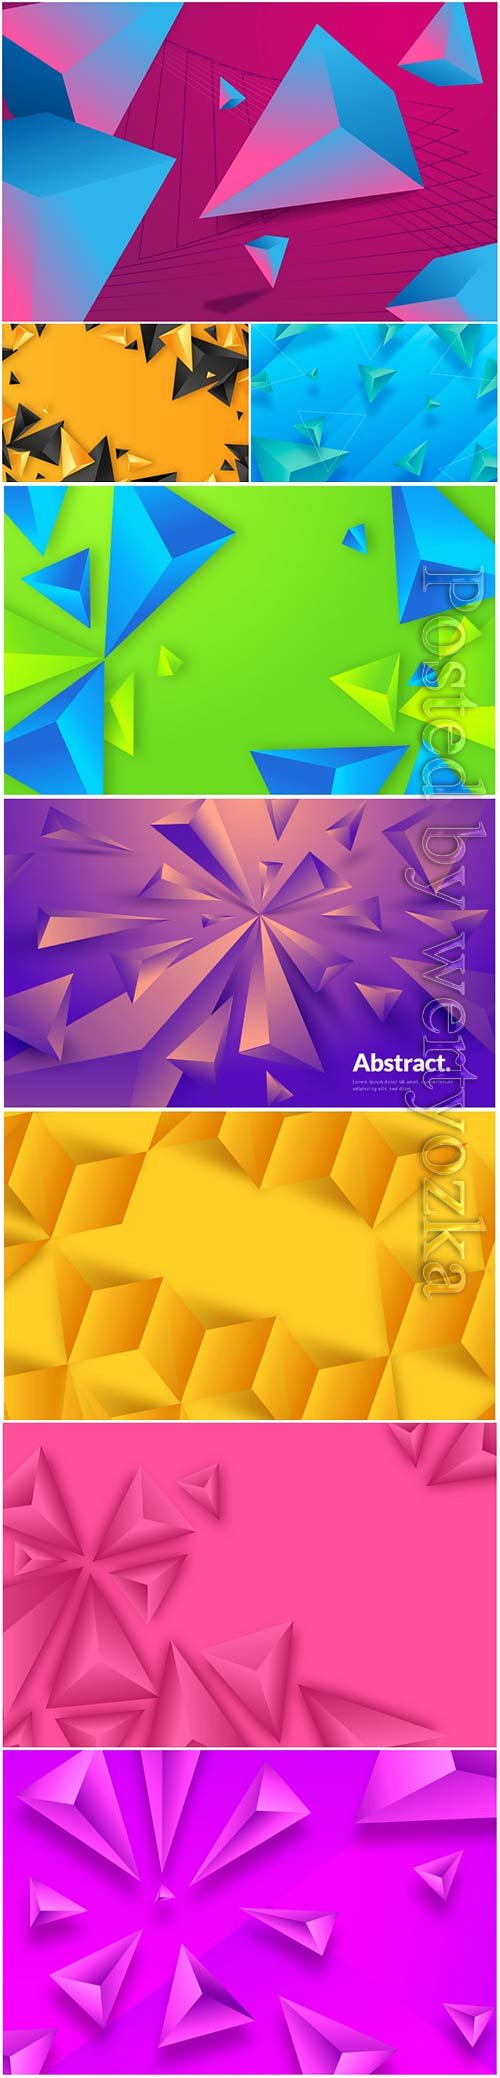 Abstract vector background, 3d models template